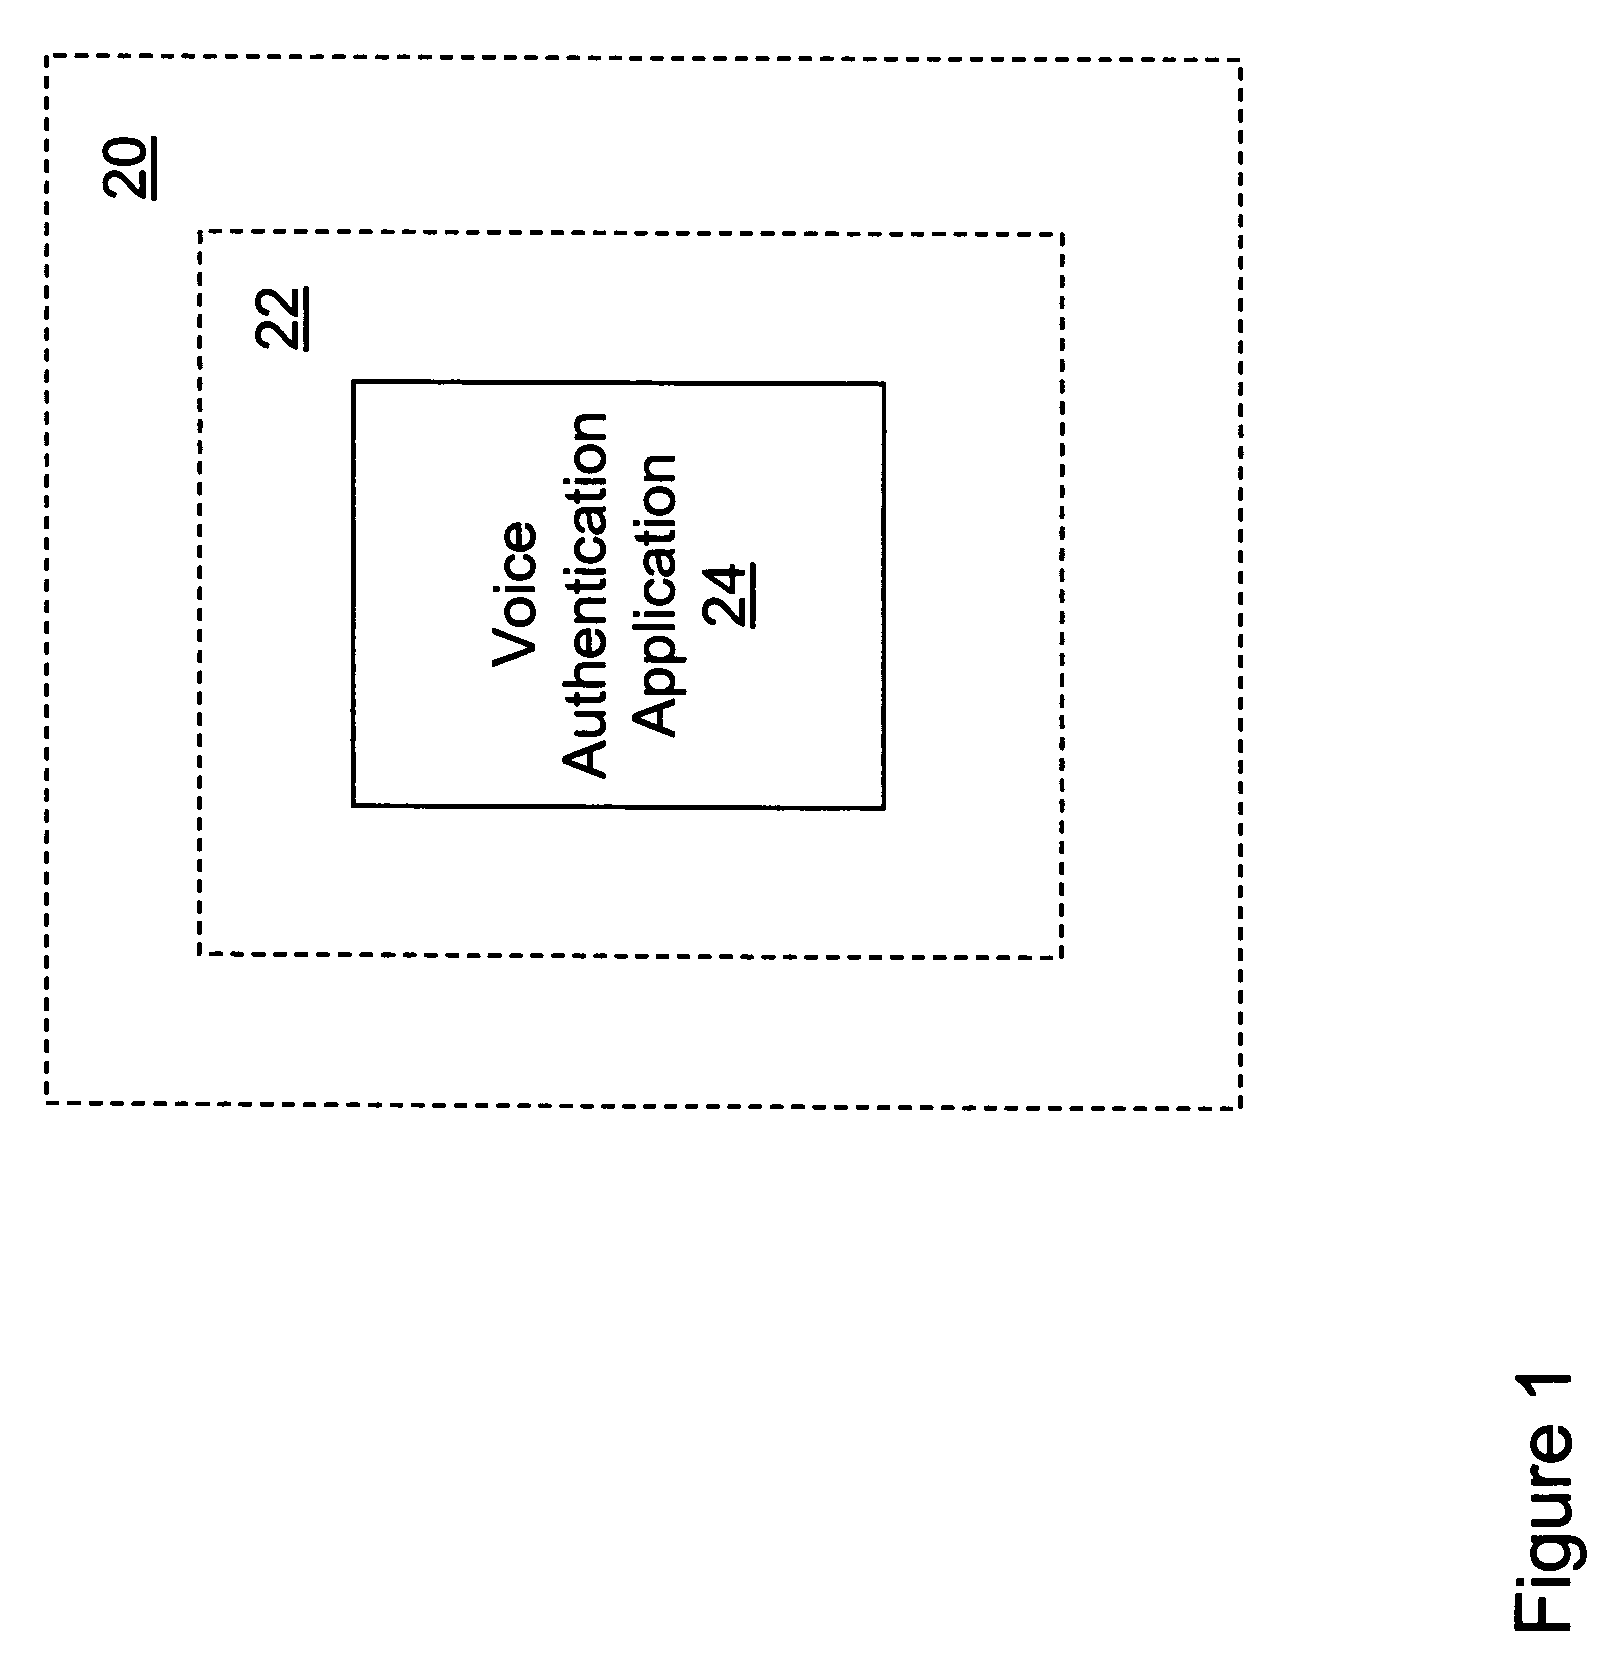 Voice authentication system and methods therefor